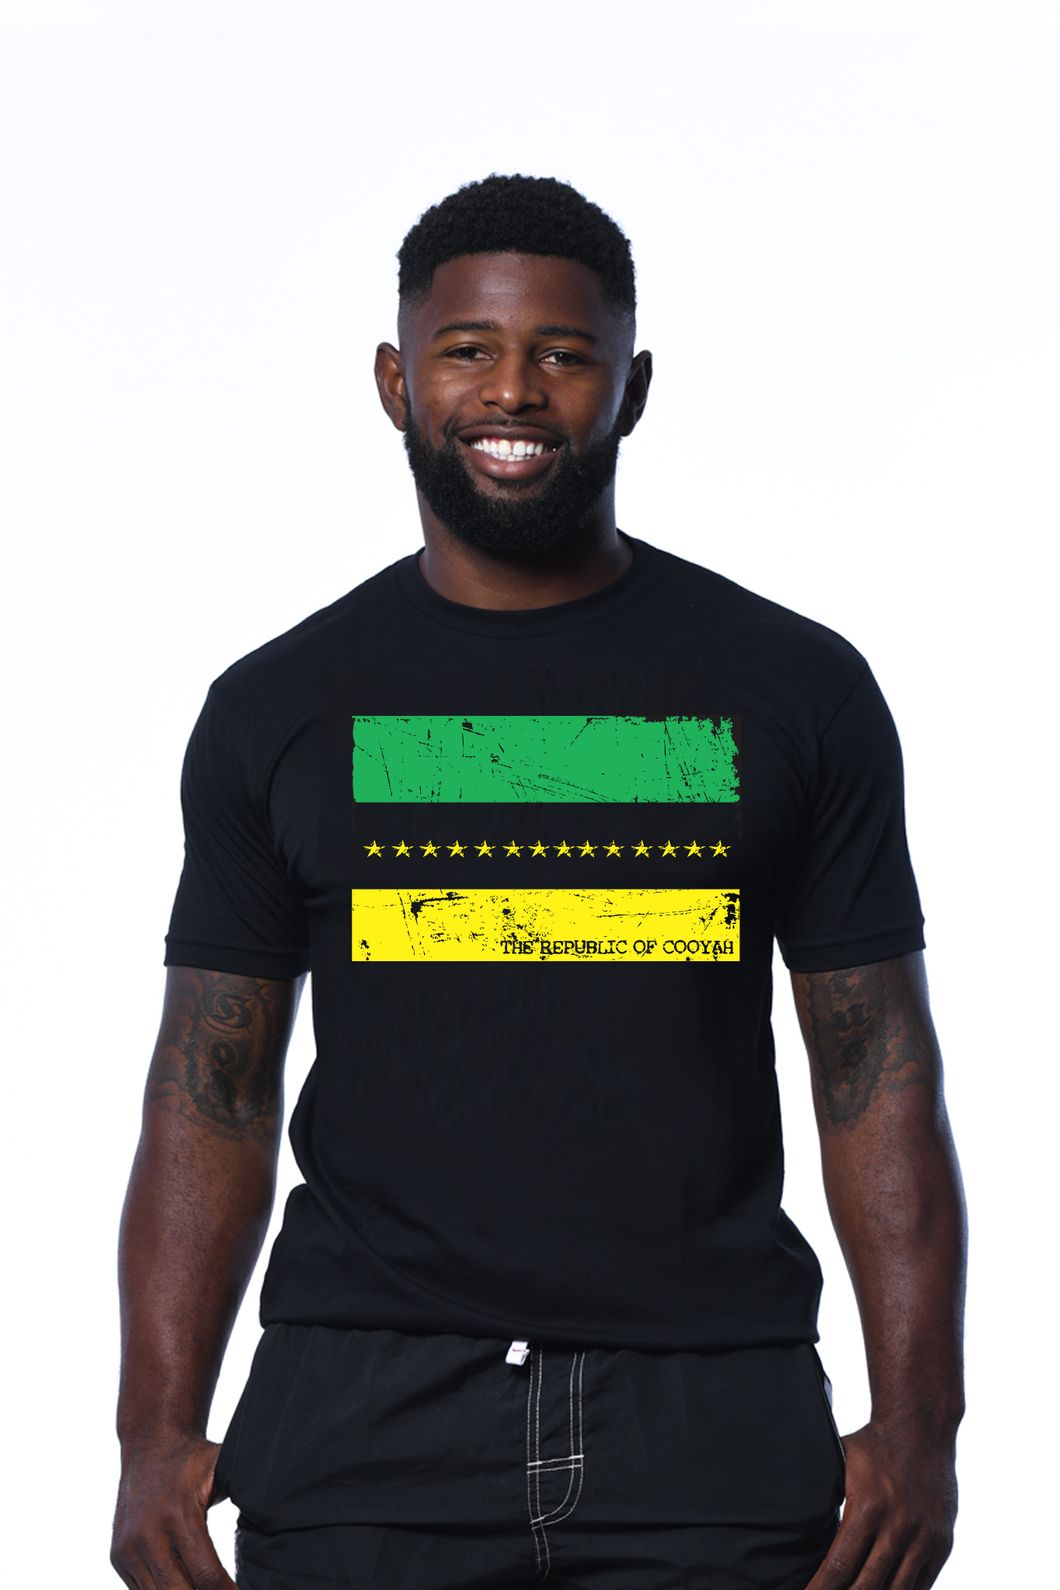 Cooyah Jamaica.  Men's Cooyah Republic tee.  Short sleeves, screen printed in Jamaican colors with a vintage style print.  Ringspun cotton.  Reggae clothing